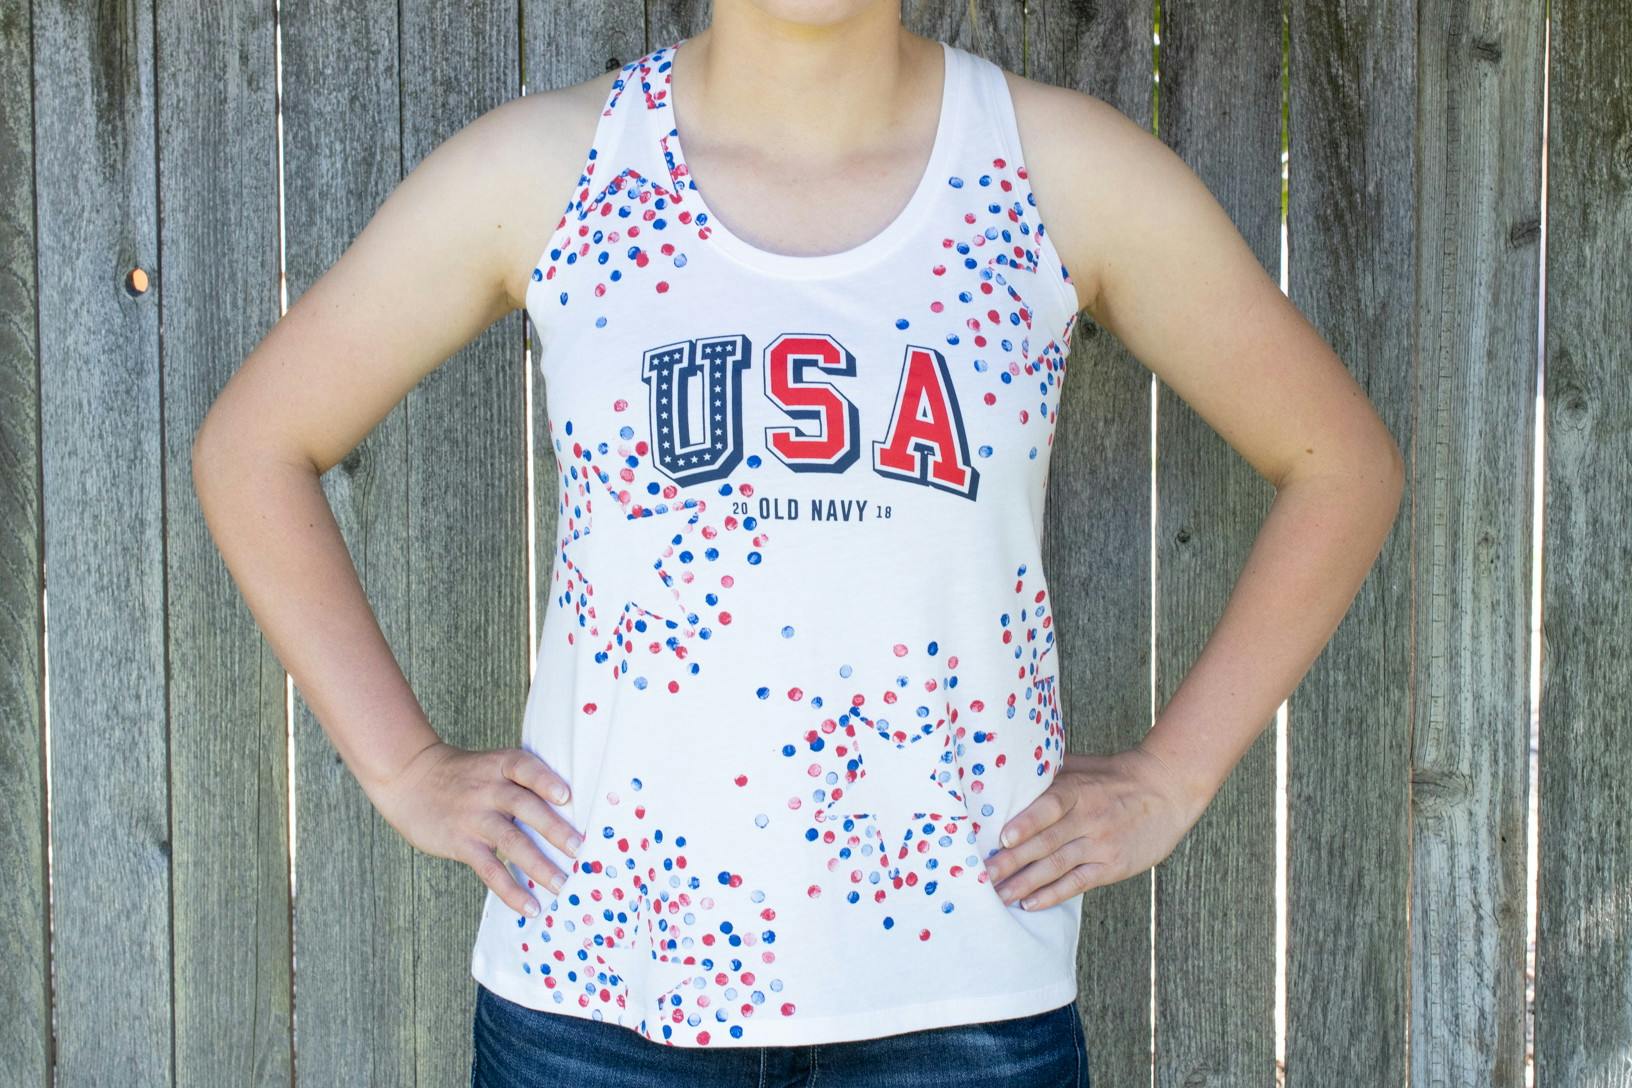 Did anyone else used to get Old Navy July 4th (whichever year) T-Shirts  growing up? Feel like this was kind of a trend. : r/Zillennials